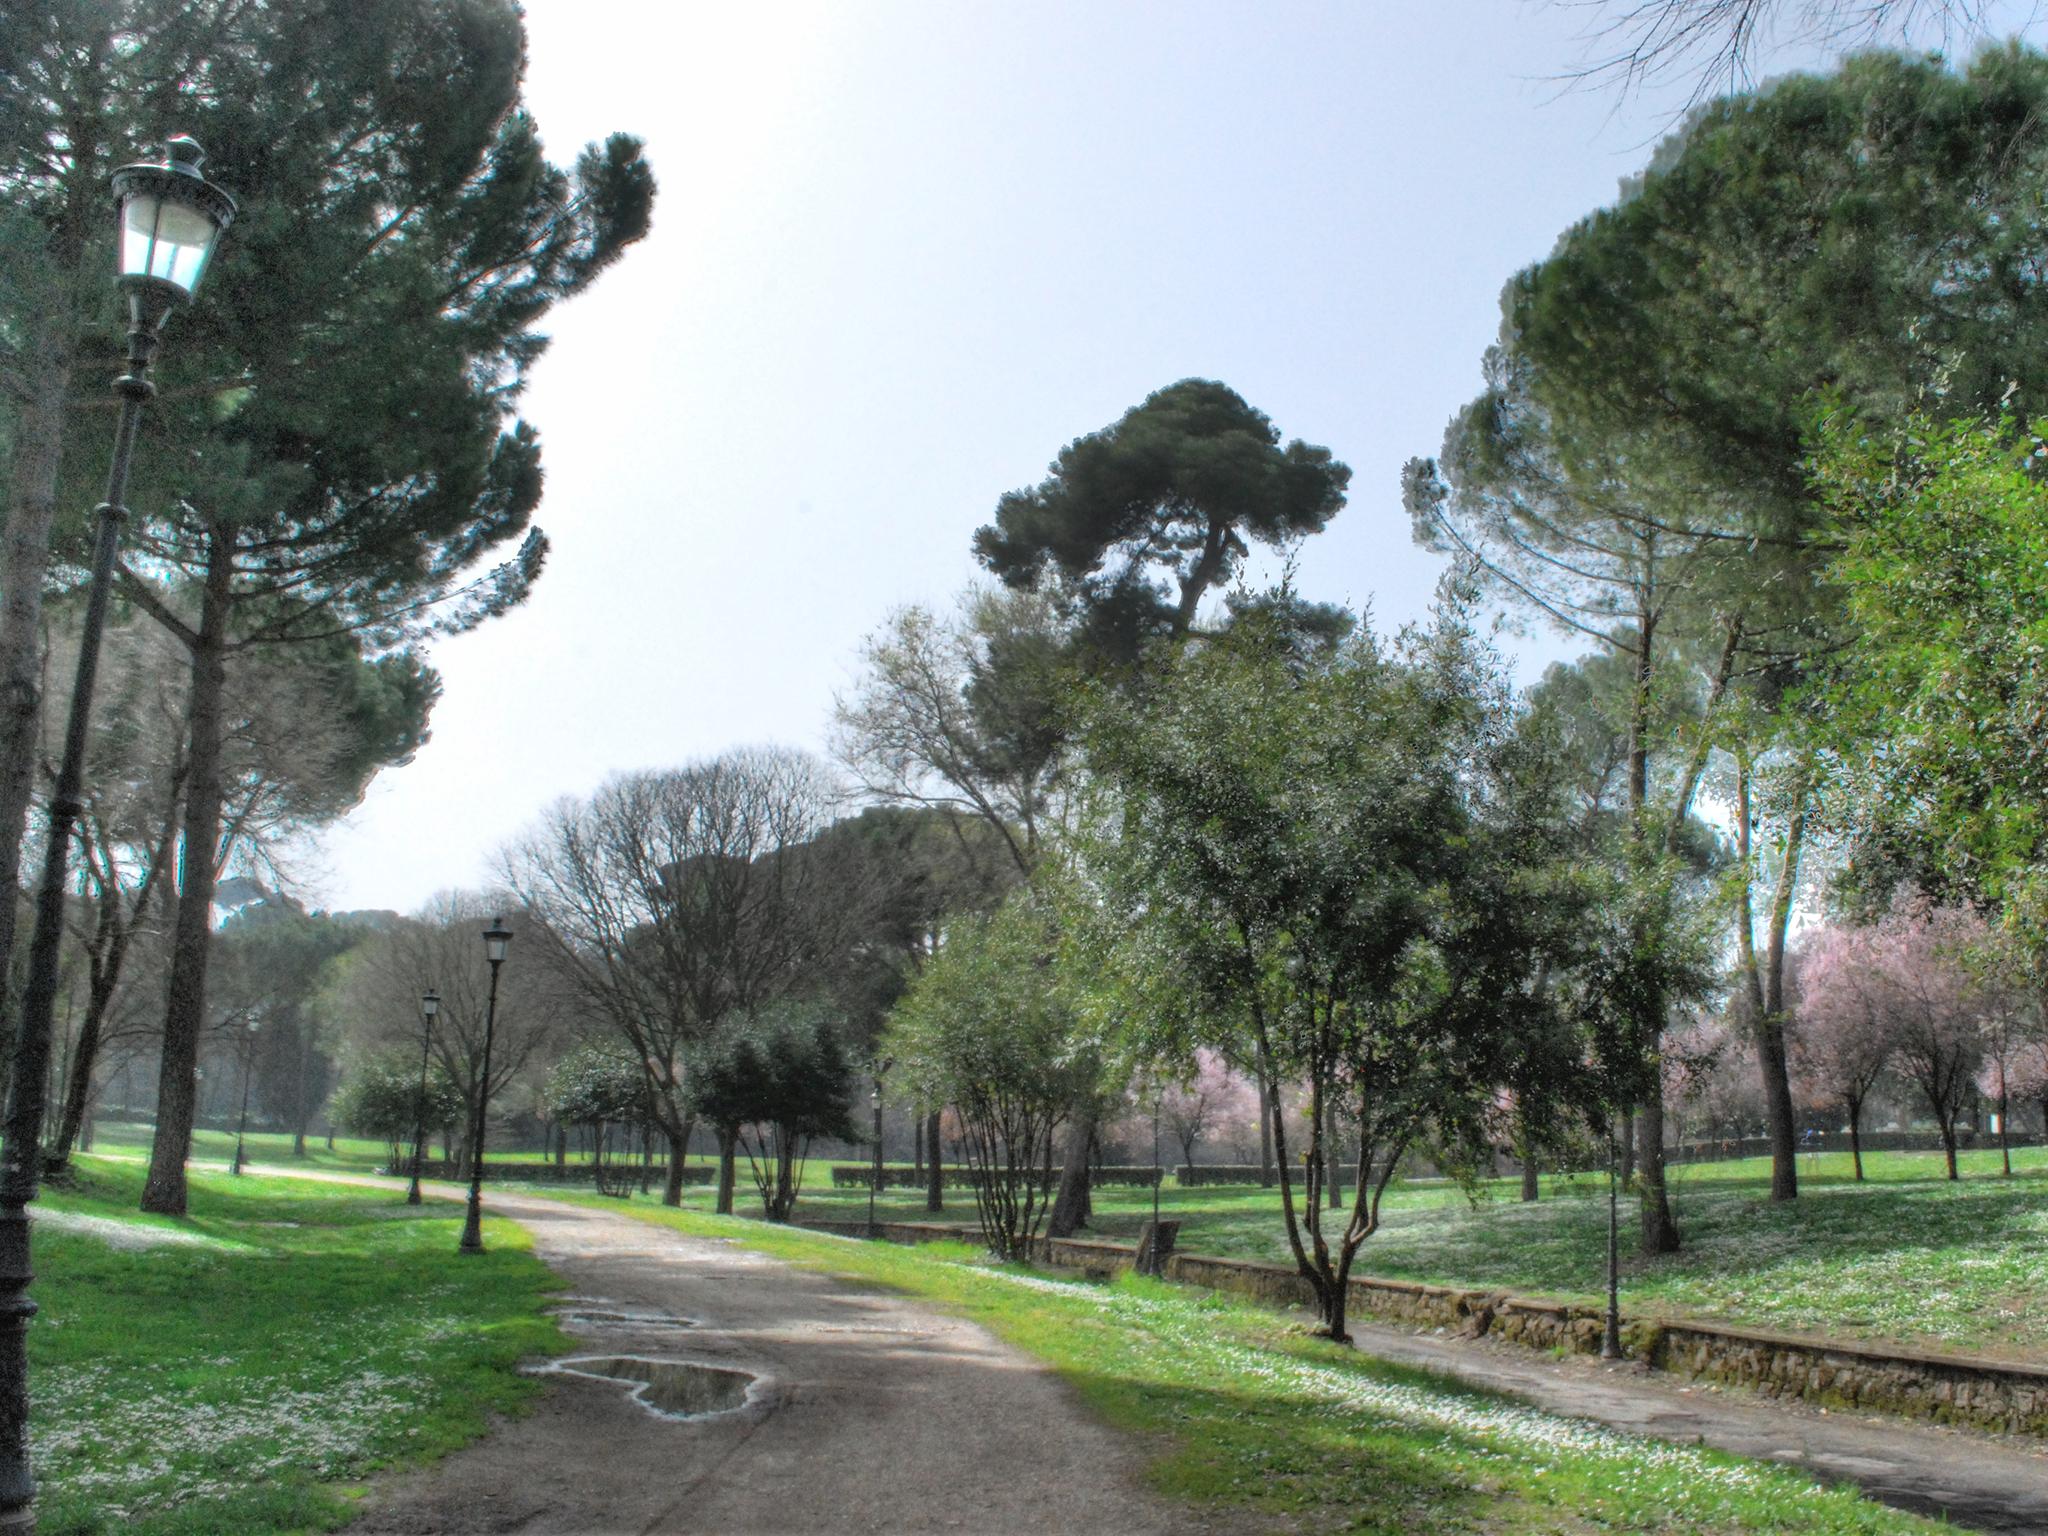 The tourist was allegedly robbed and bound before being raped in the Villa Borghese park just north of the Italian capital’s centre